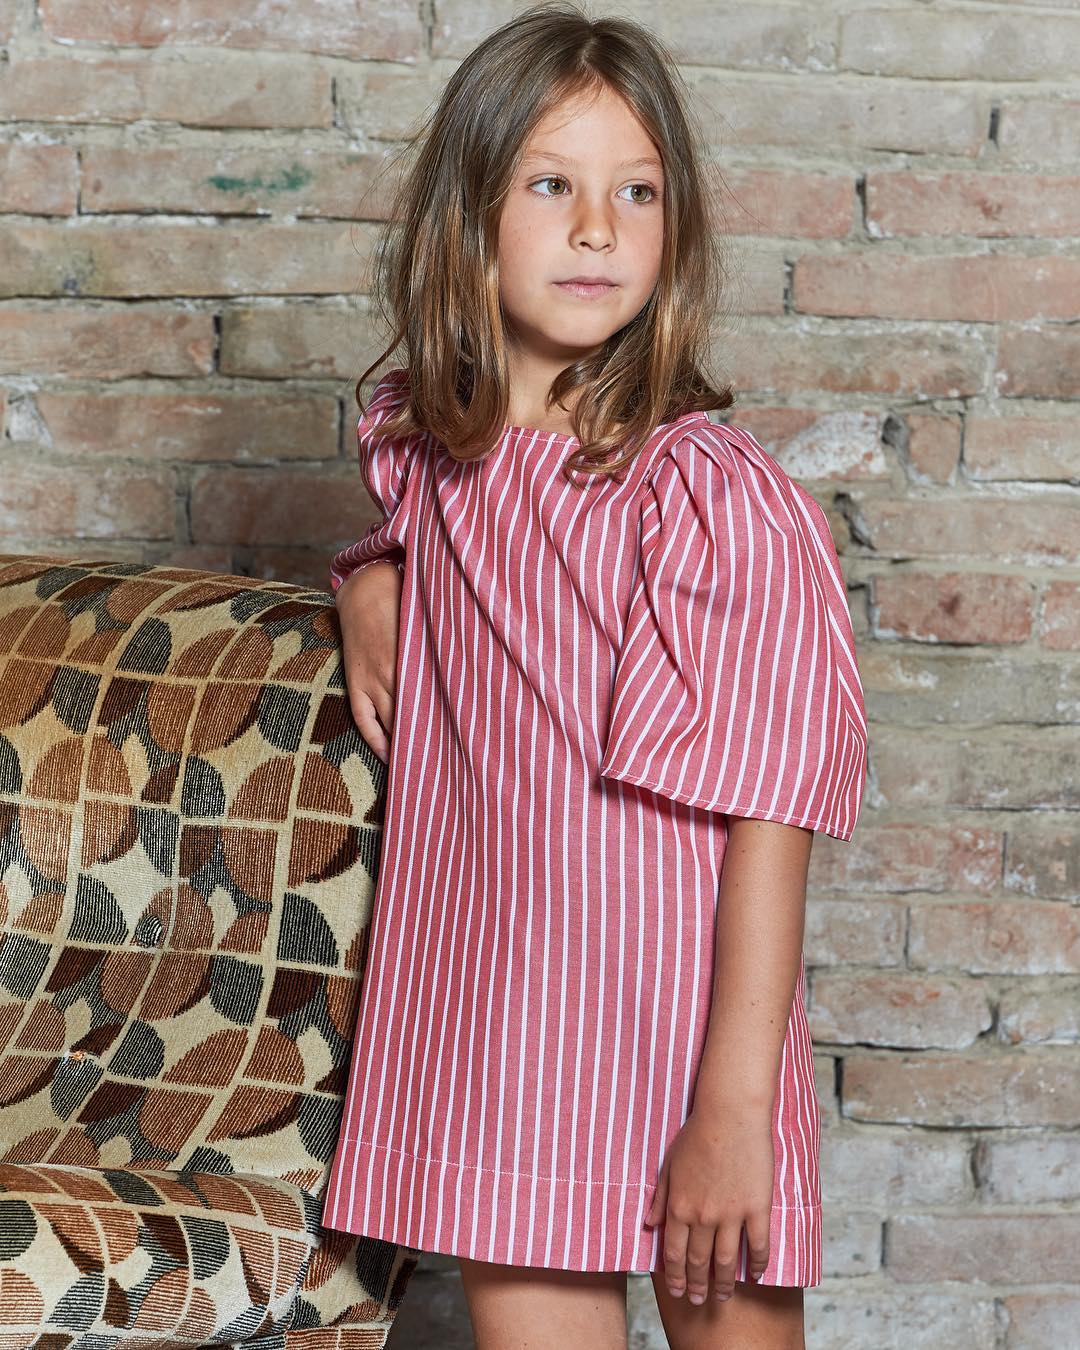 DouuodKids ss collection 2019, available…